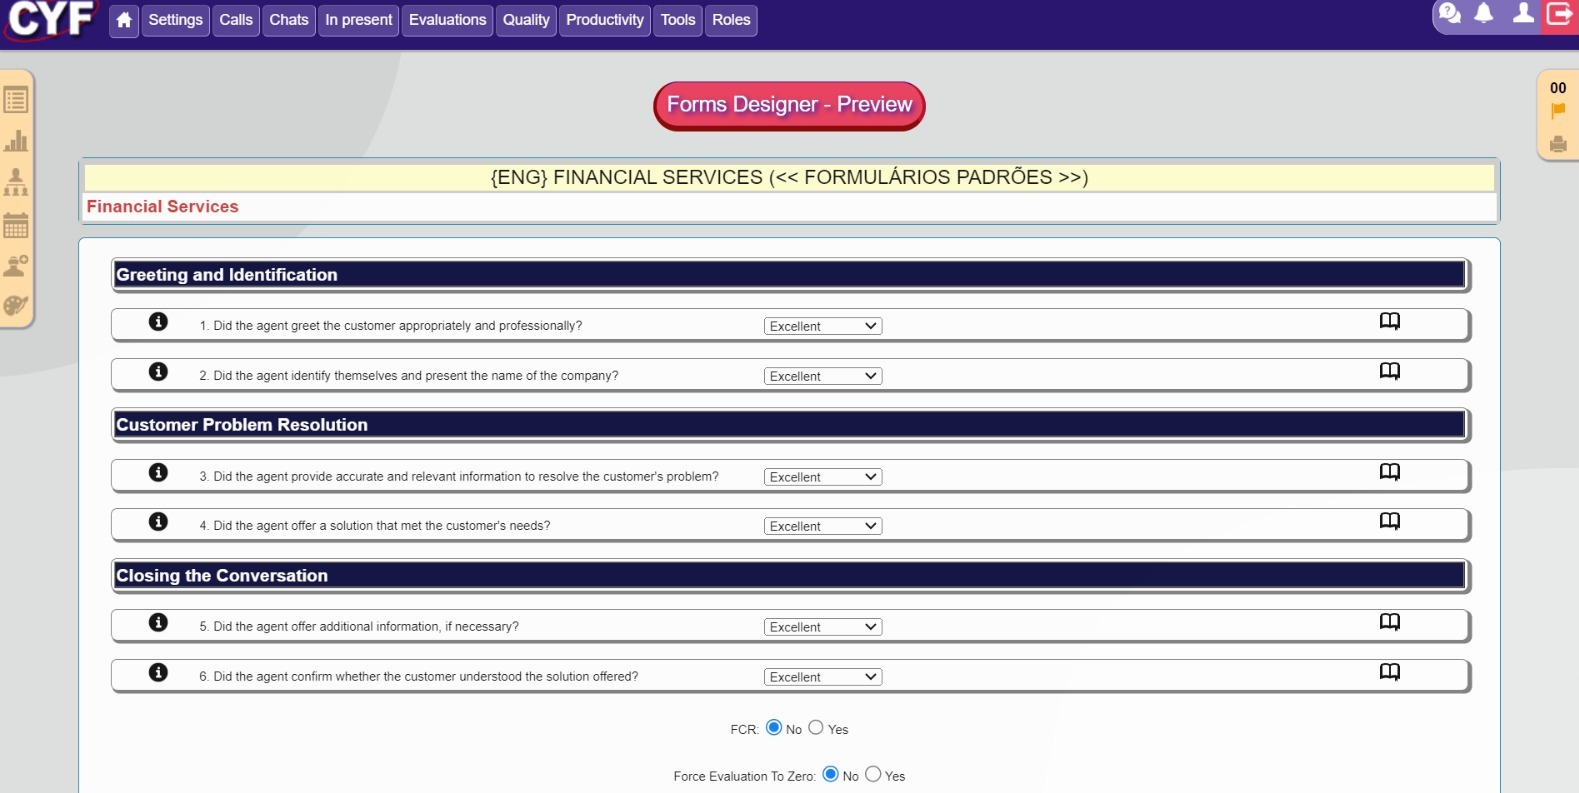 Quality Monitoring Scorecard for Financial Services